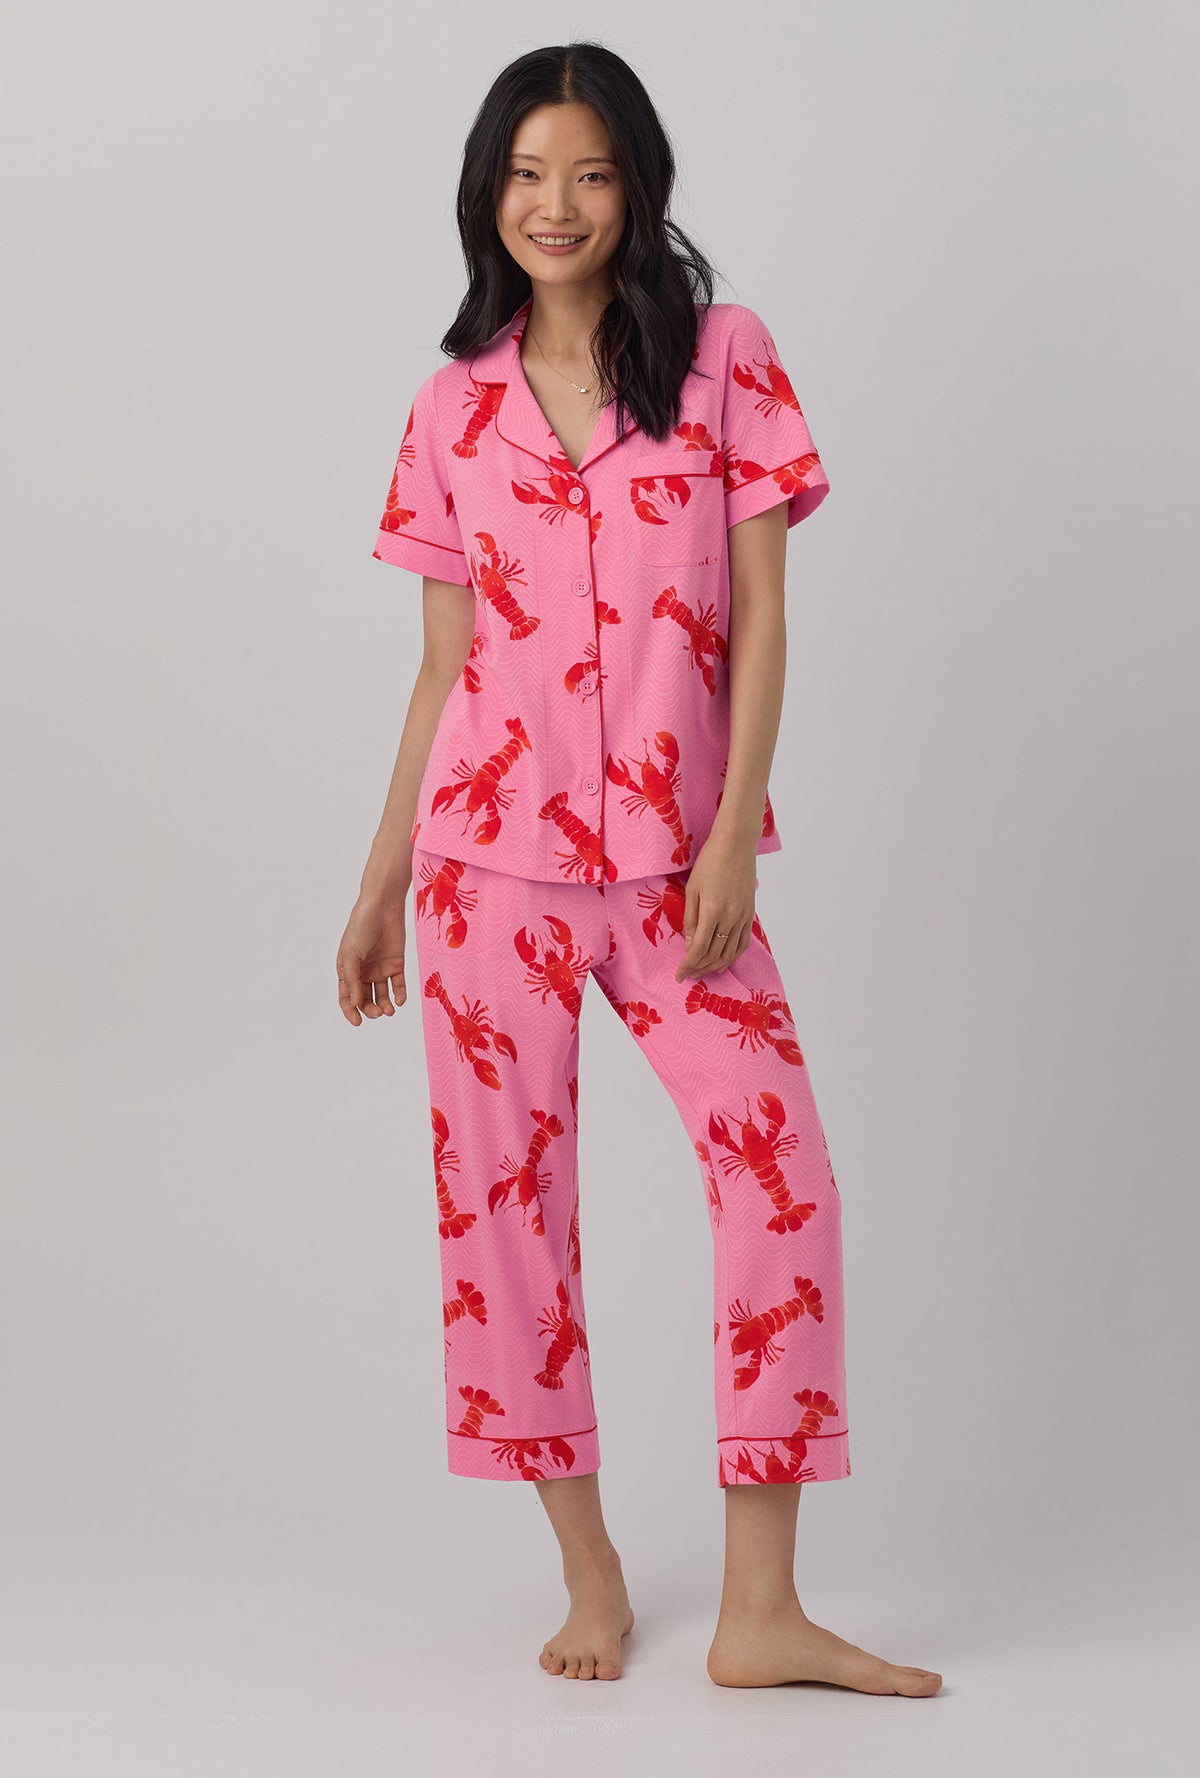 A lady wearing  pink  Short Sleeve Classic Stretch Jersey Cropped PJ Set with Lobster Fest print.